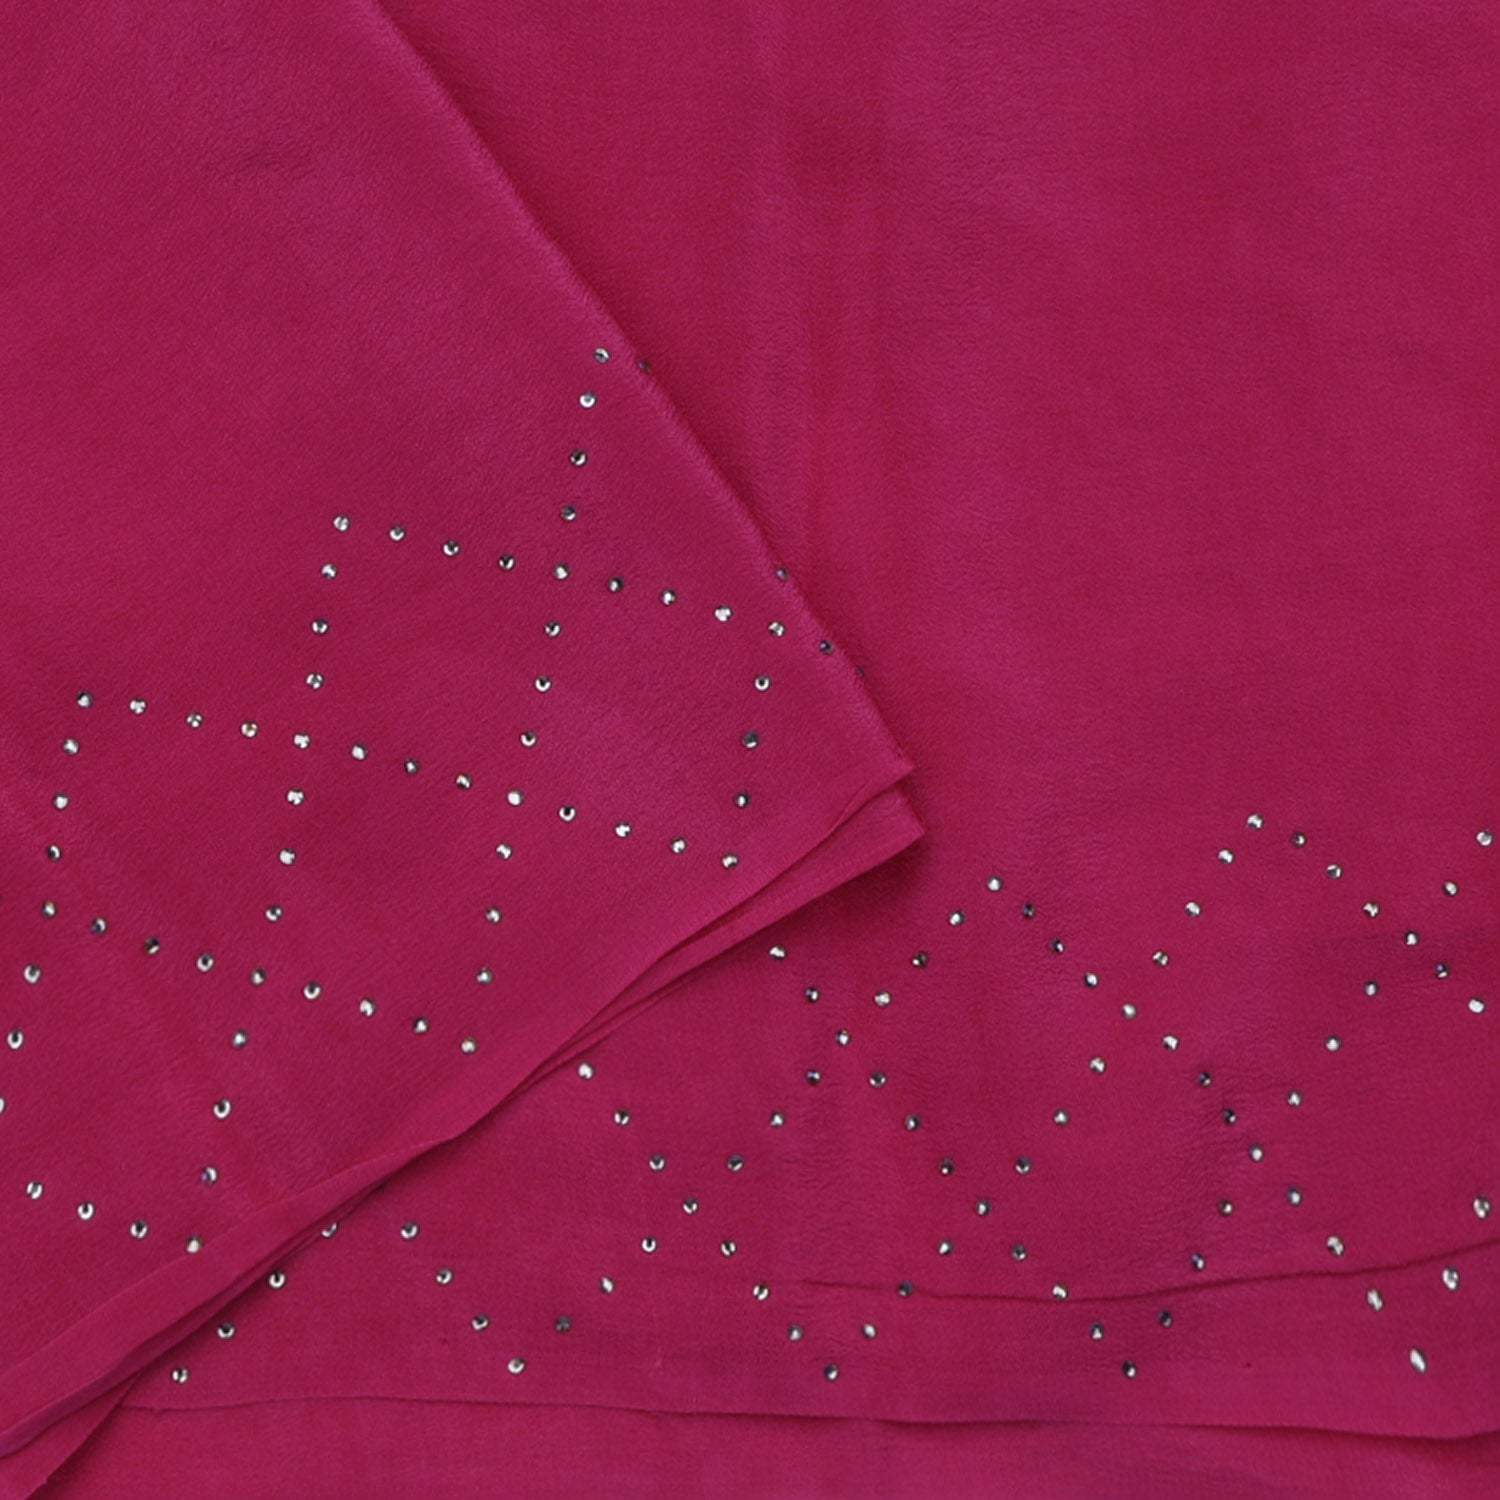 Pink Chiffon Saree With Stone Embroidery - Singhania's